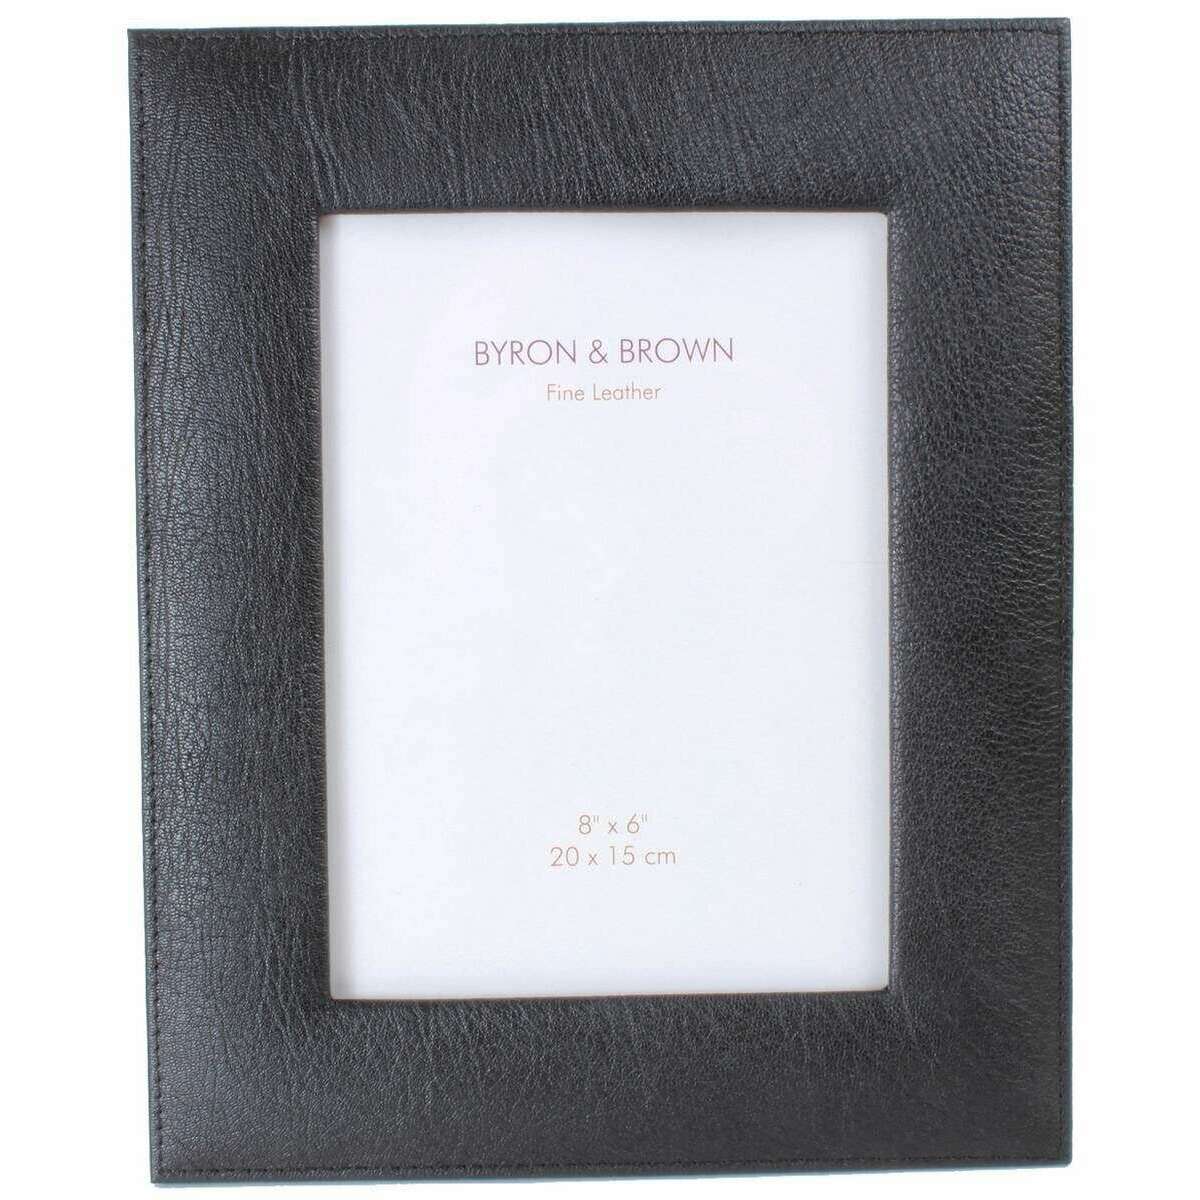 Byron and Brown Vintage Leather Photo Frame 8x6 - Black